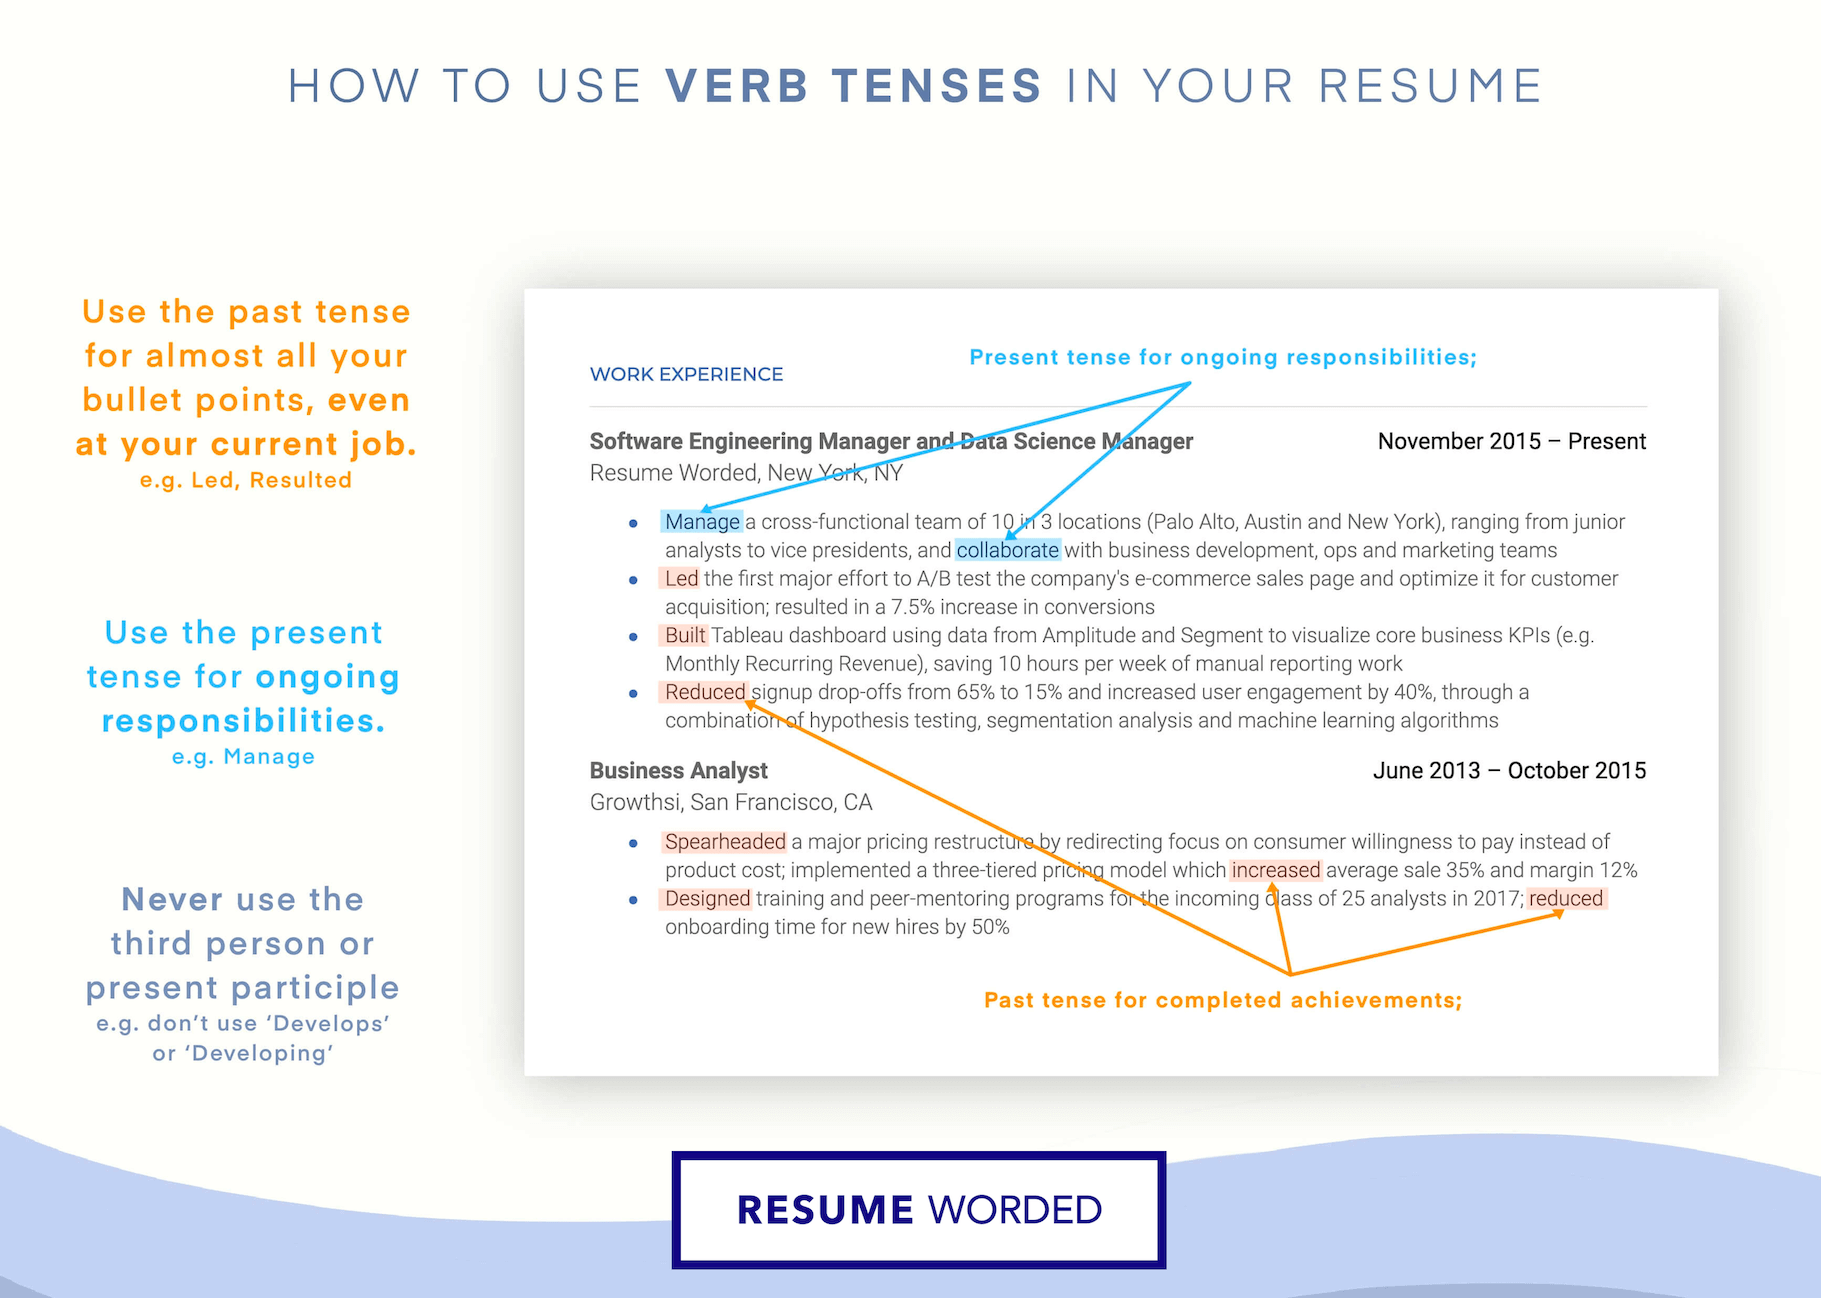 12 Synonyms for 'Ensure' That Will Upgrade Your Resume in 2023